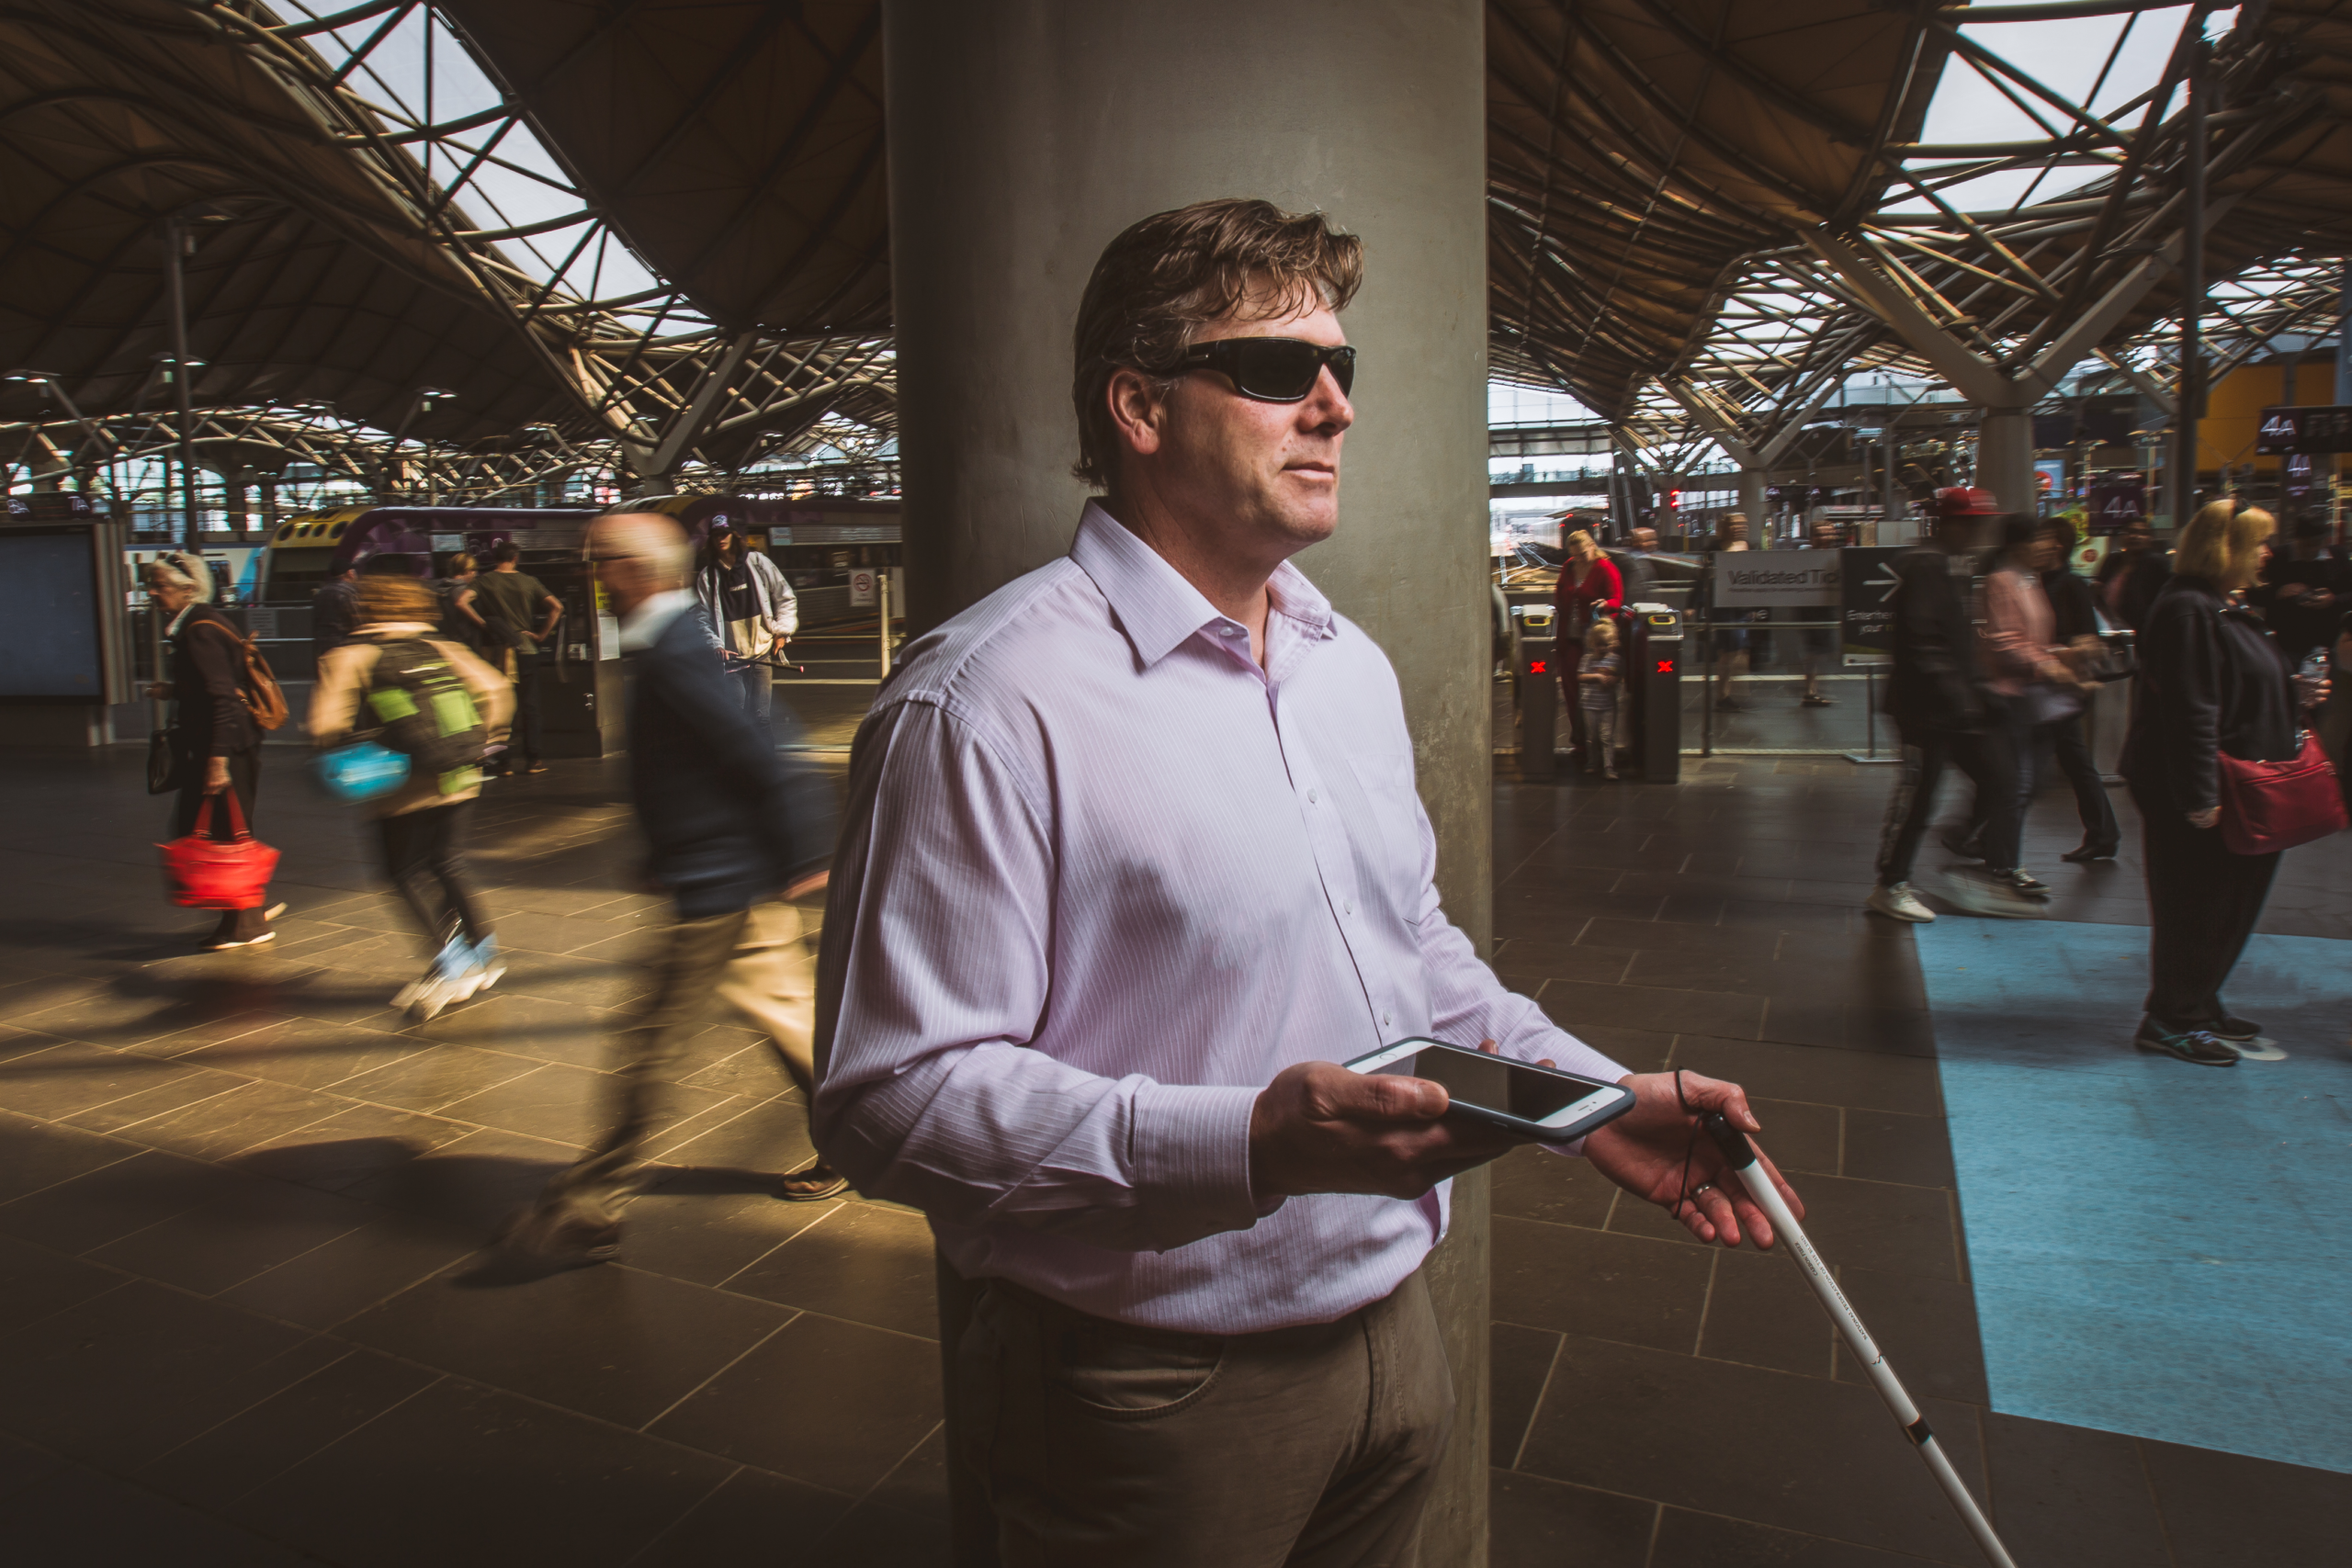 The Beacon Technology for People with Low Vision or Blindness